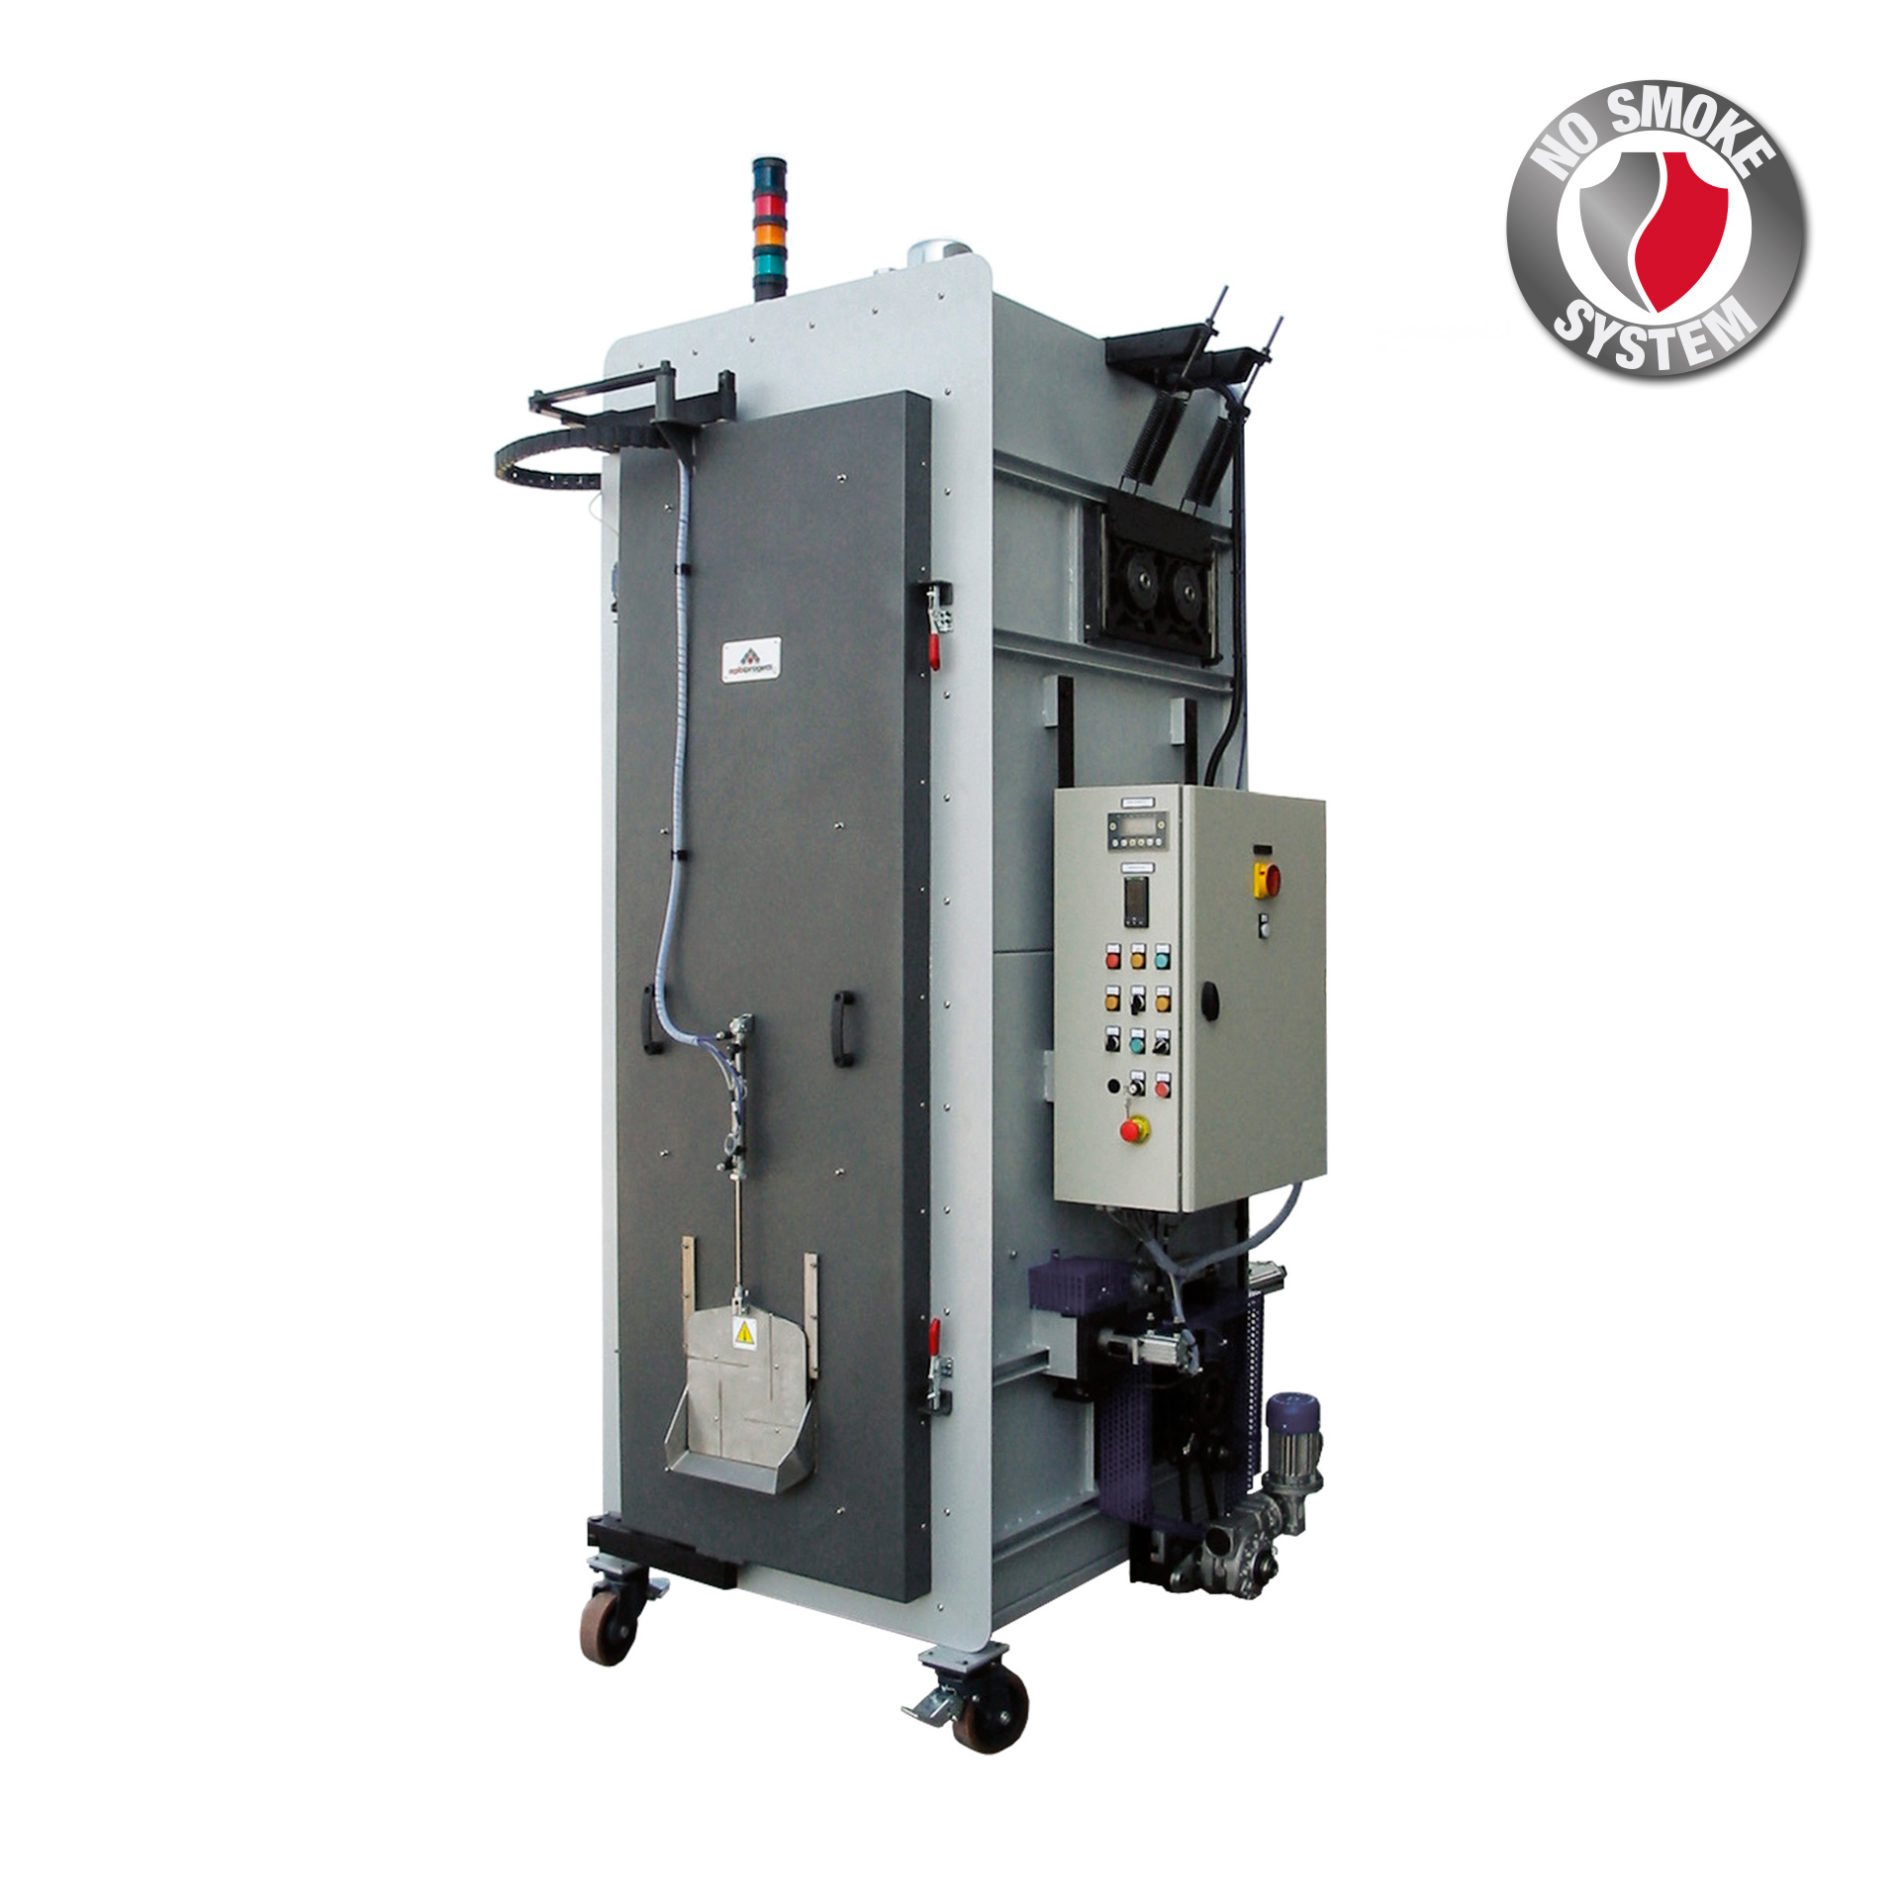 Electric ventilated furnace with vertical chamber and bucket elevator